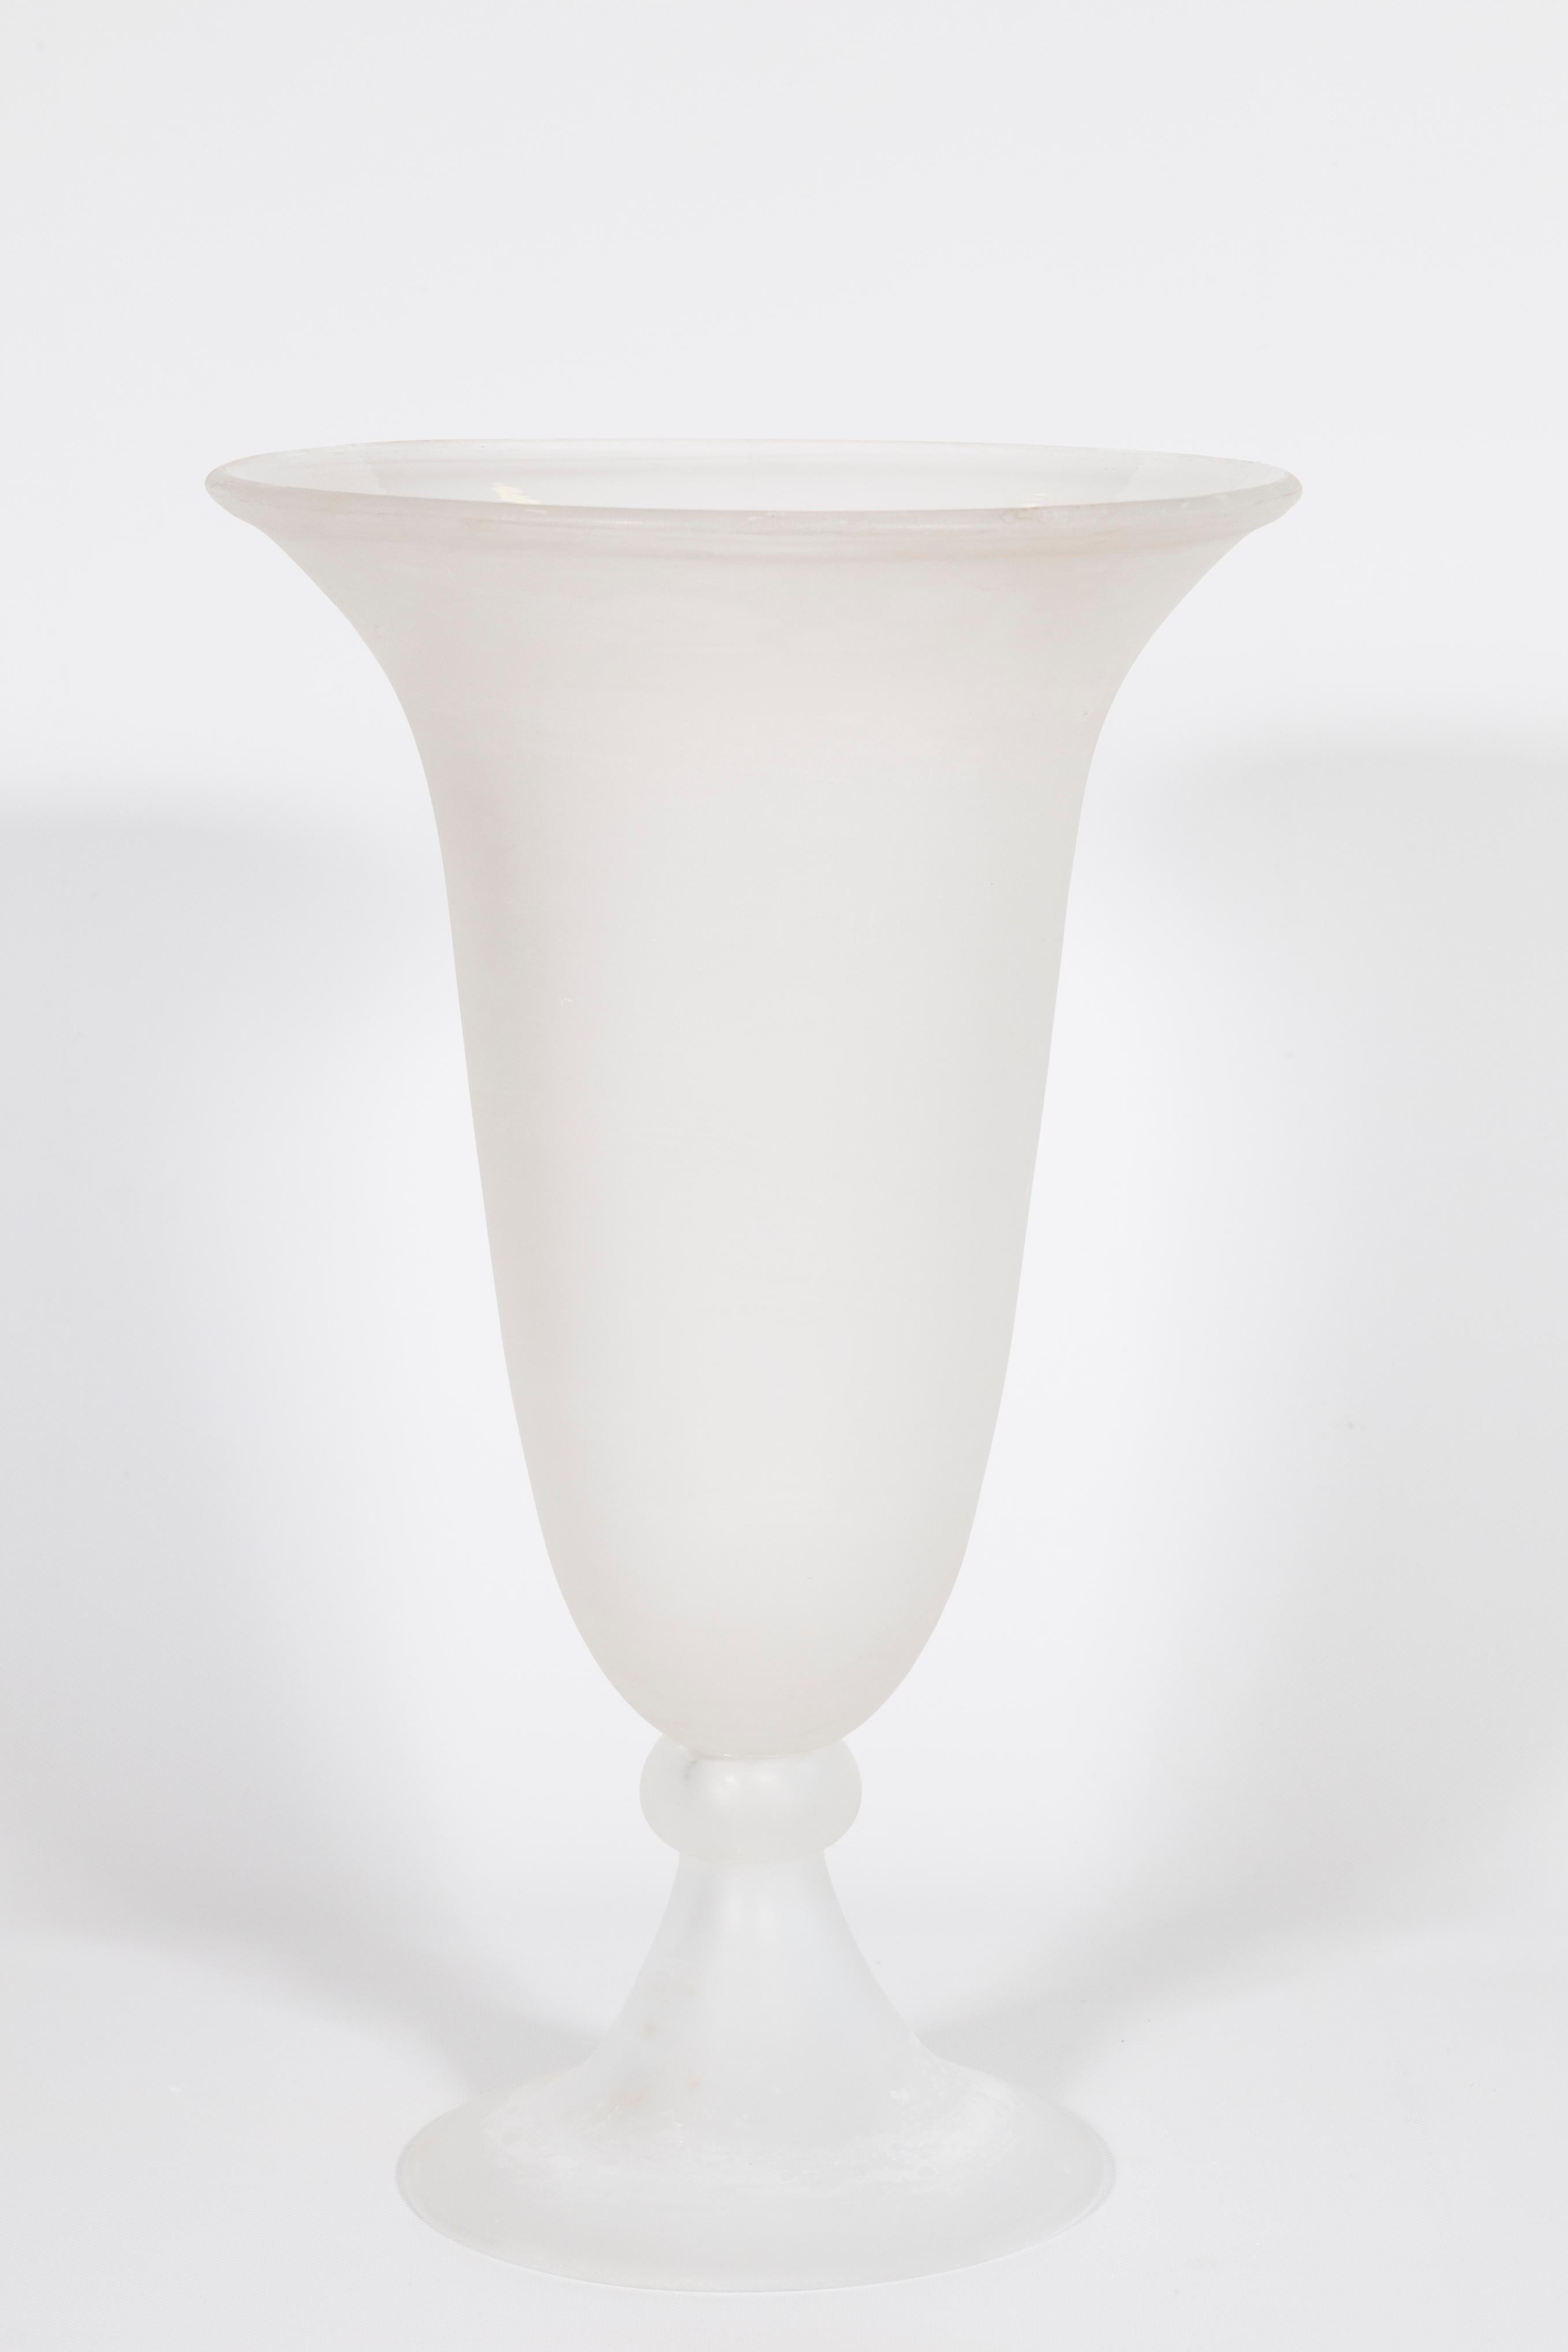 Pure White Cenedese cavated style Vase in Blown Murano Glass Venice Italy 1990s.
Entirely handcrafted in the 1990s, this superb vase is an original work of art by Cenedese, one of the most famous Venetian glassblower in Murano, the island devoted to